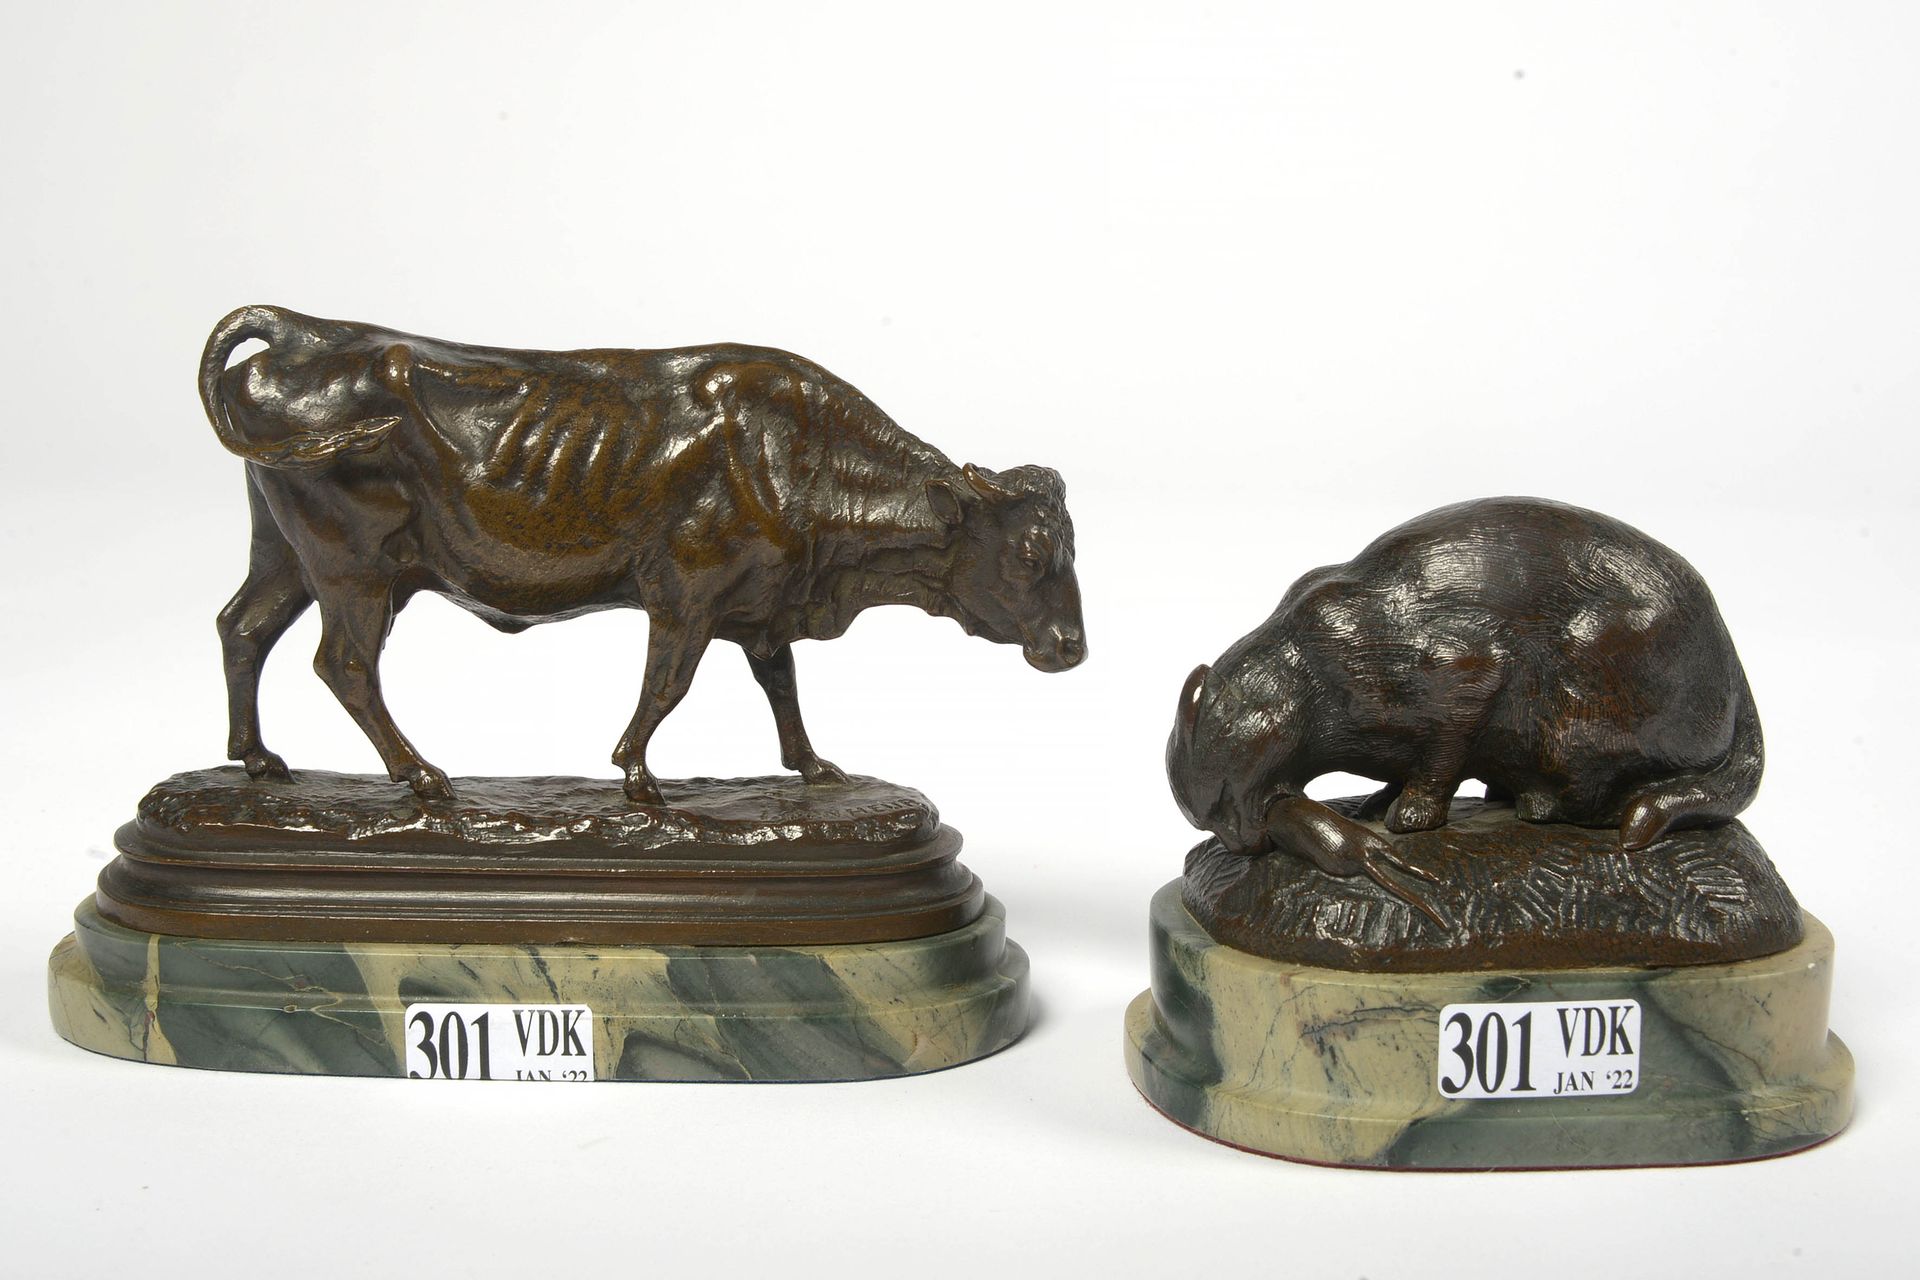 BONHEUR Isidore (1827 - 1901) Lot of two sculptures: "The cat and the mouse" in &hellip;